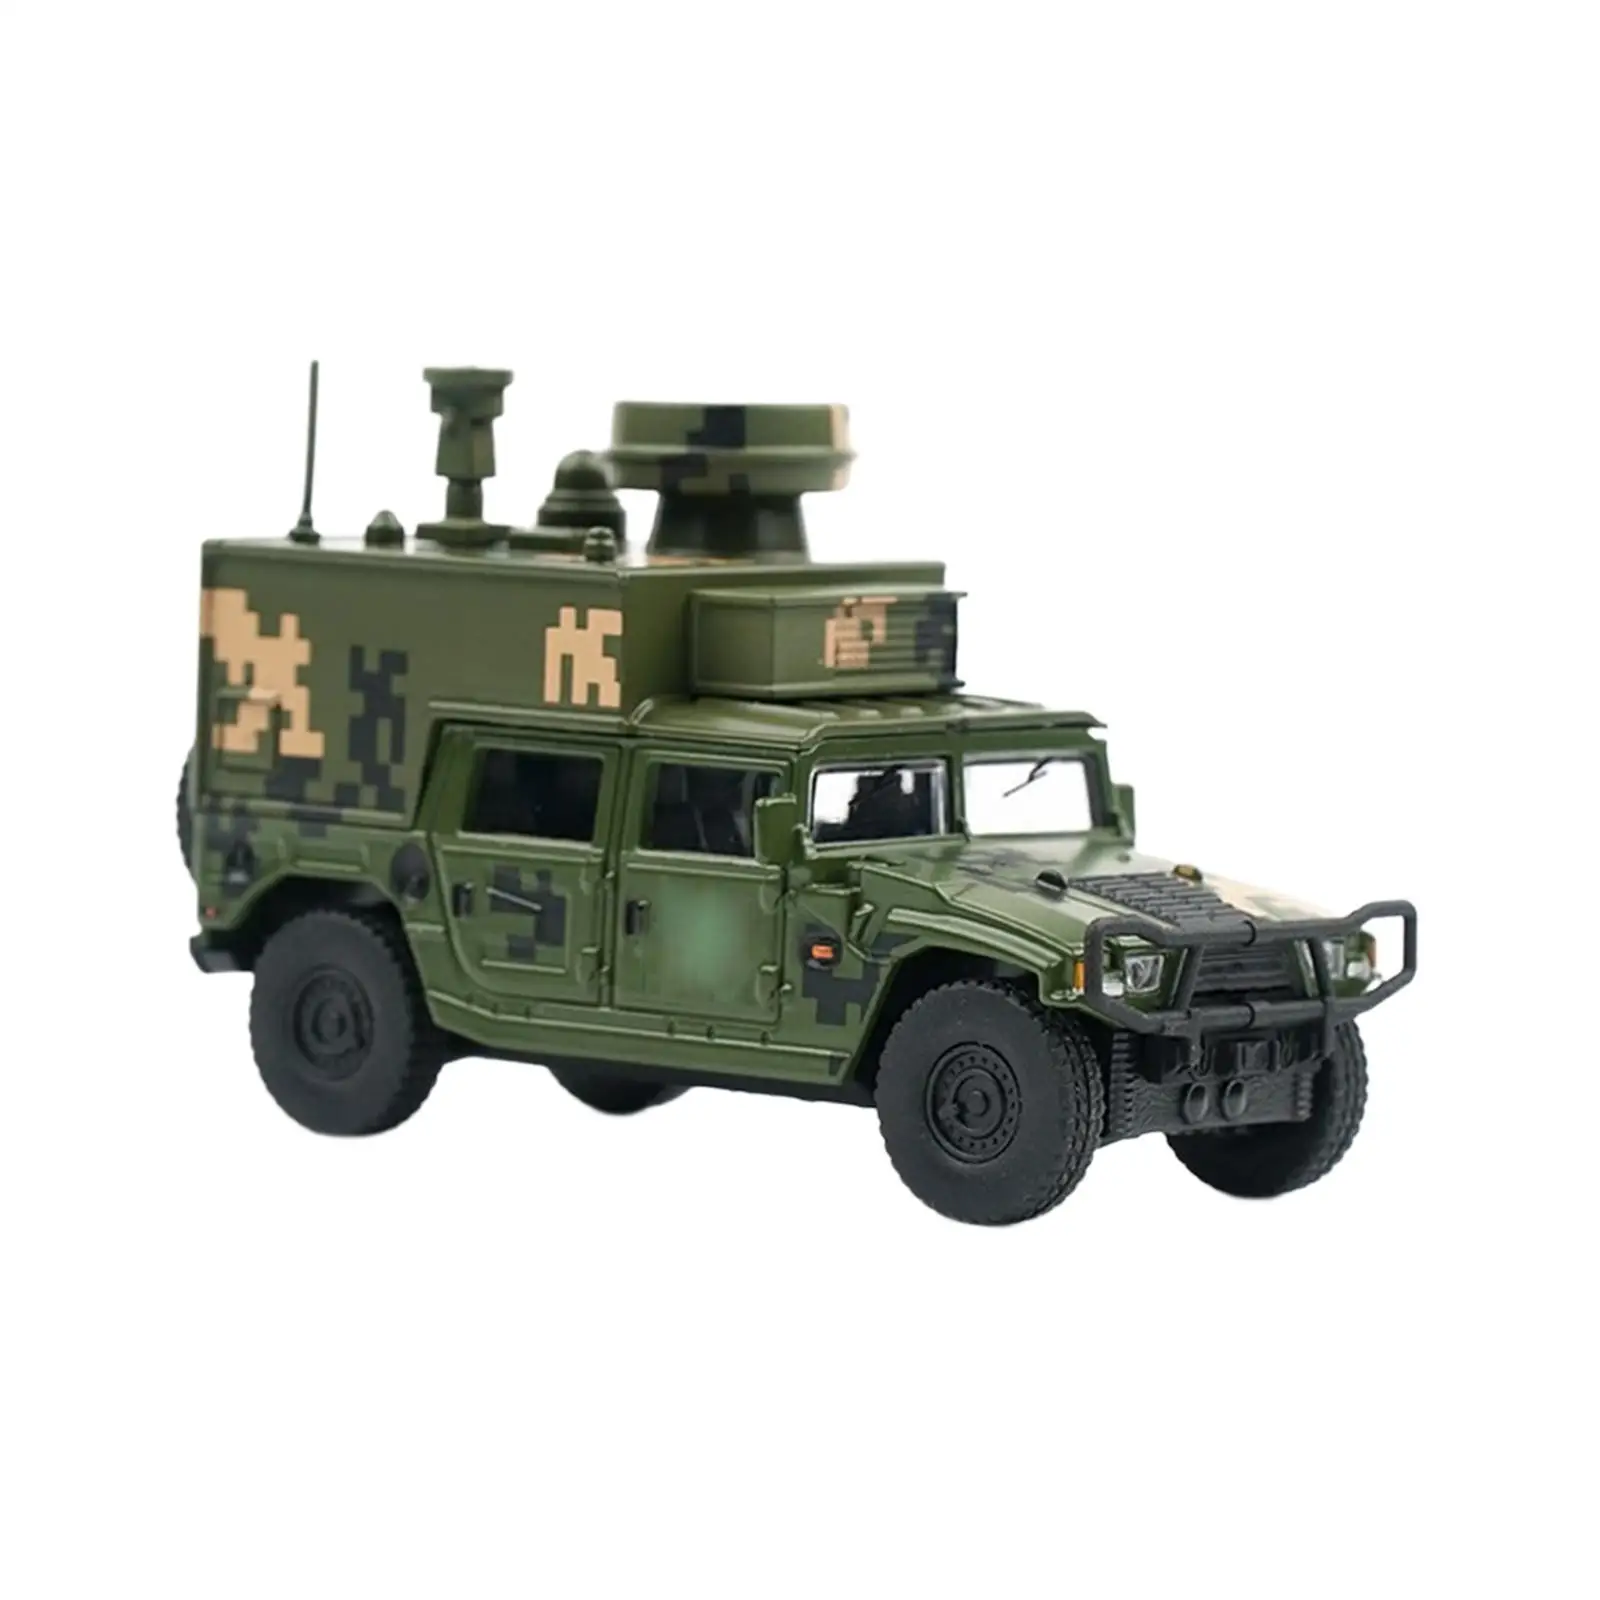 

Diecast Truck Collectible 1:64 Scale Model Car Pull Back Toy Armored Toy Car for Toddlers Birthday Gift Children Kids Adults